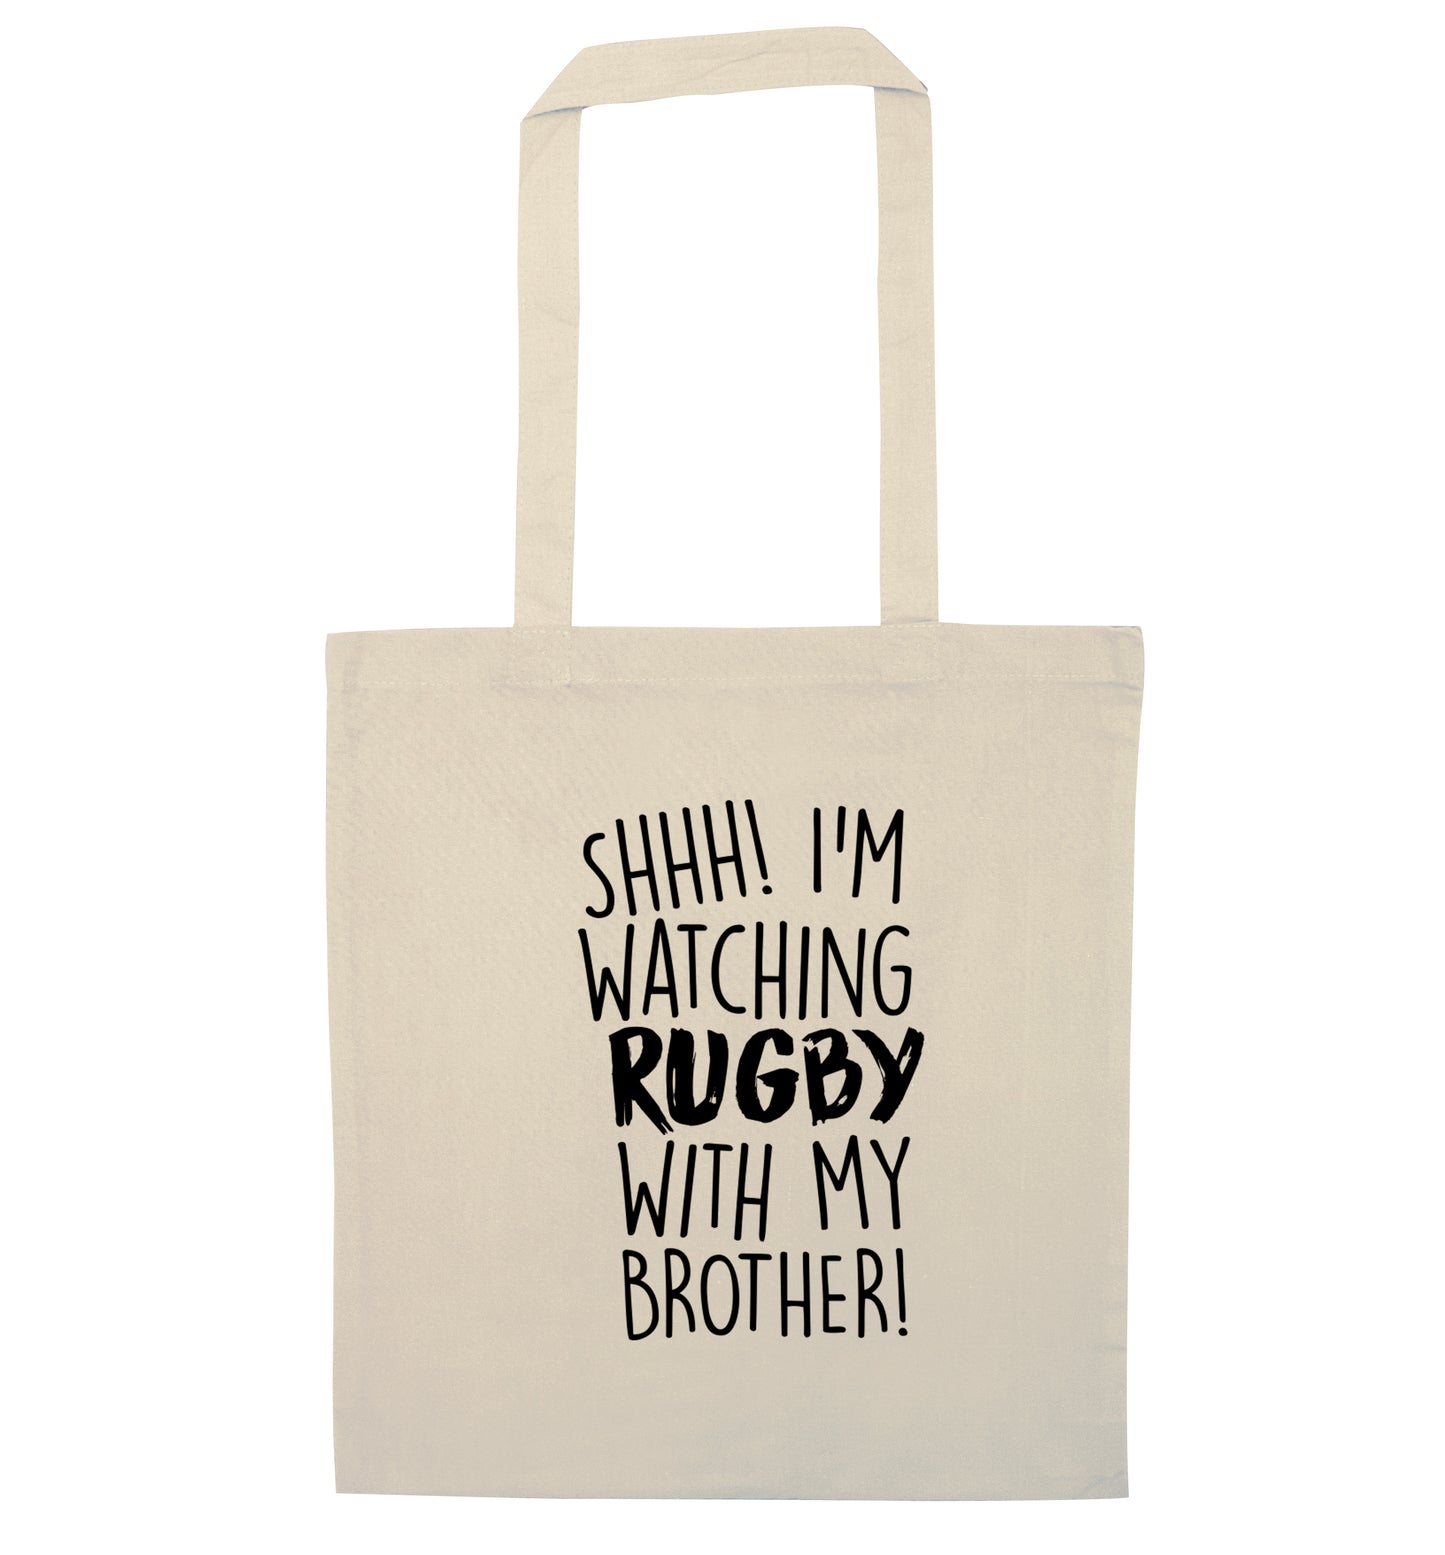 Shh... I'm watching rugby with my brother natural tote bag